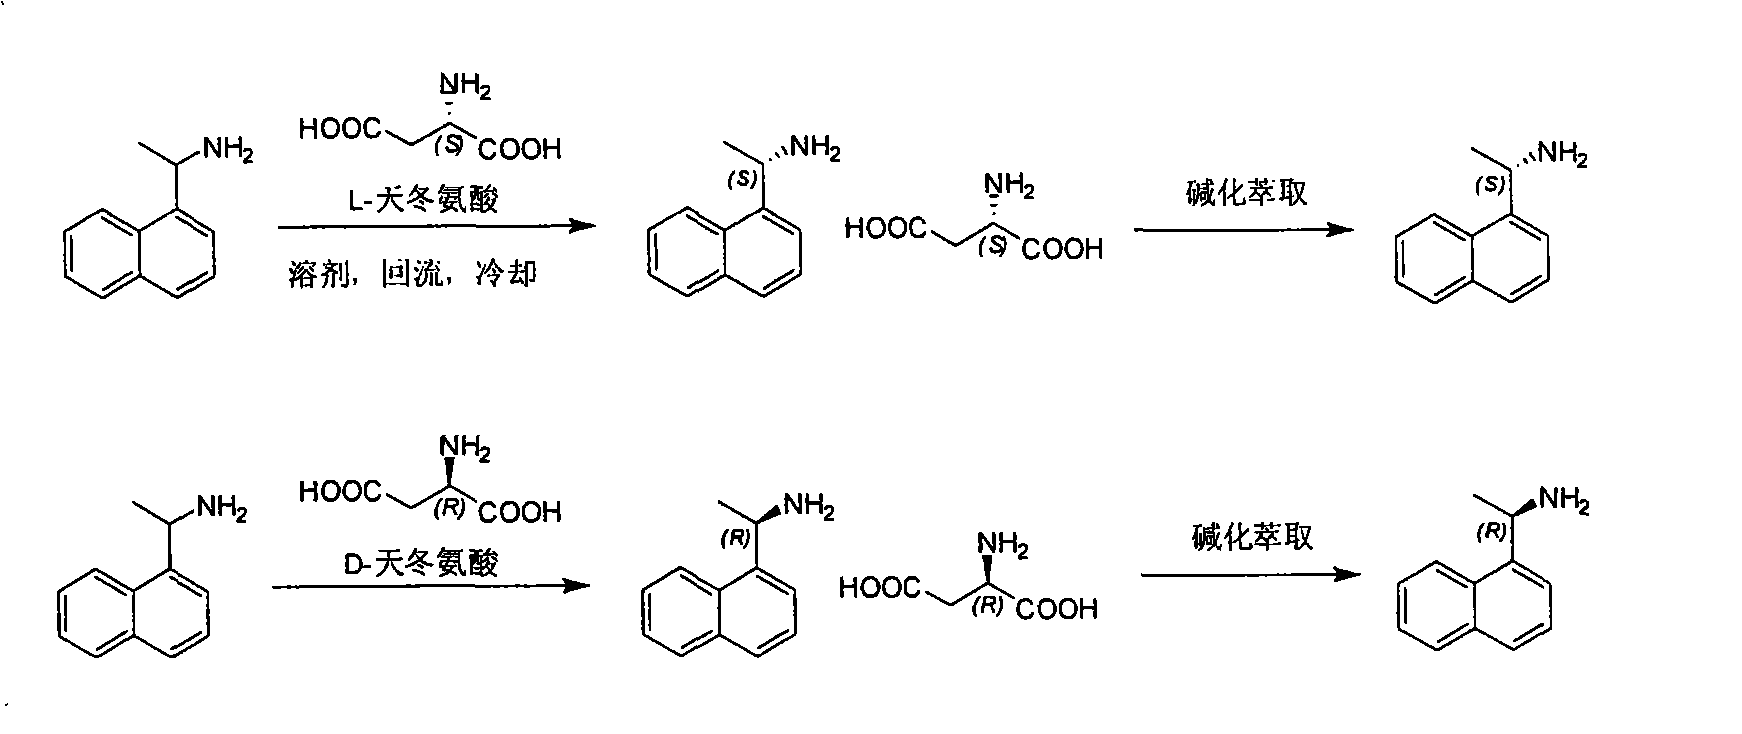 Method for preparing optical pure 1-(1-naphthyl)ethylamine by separation